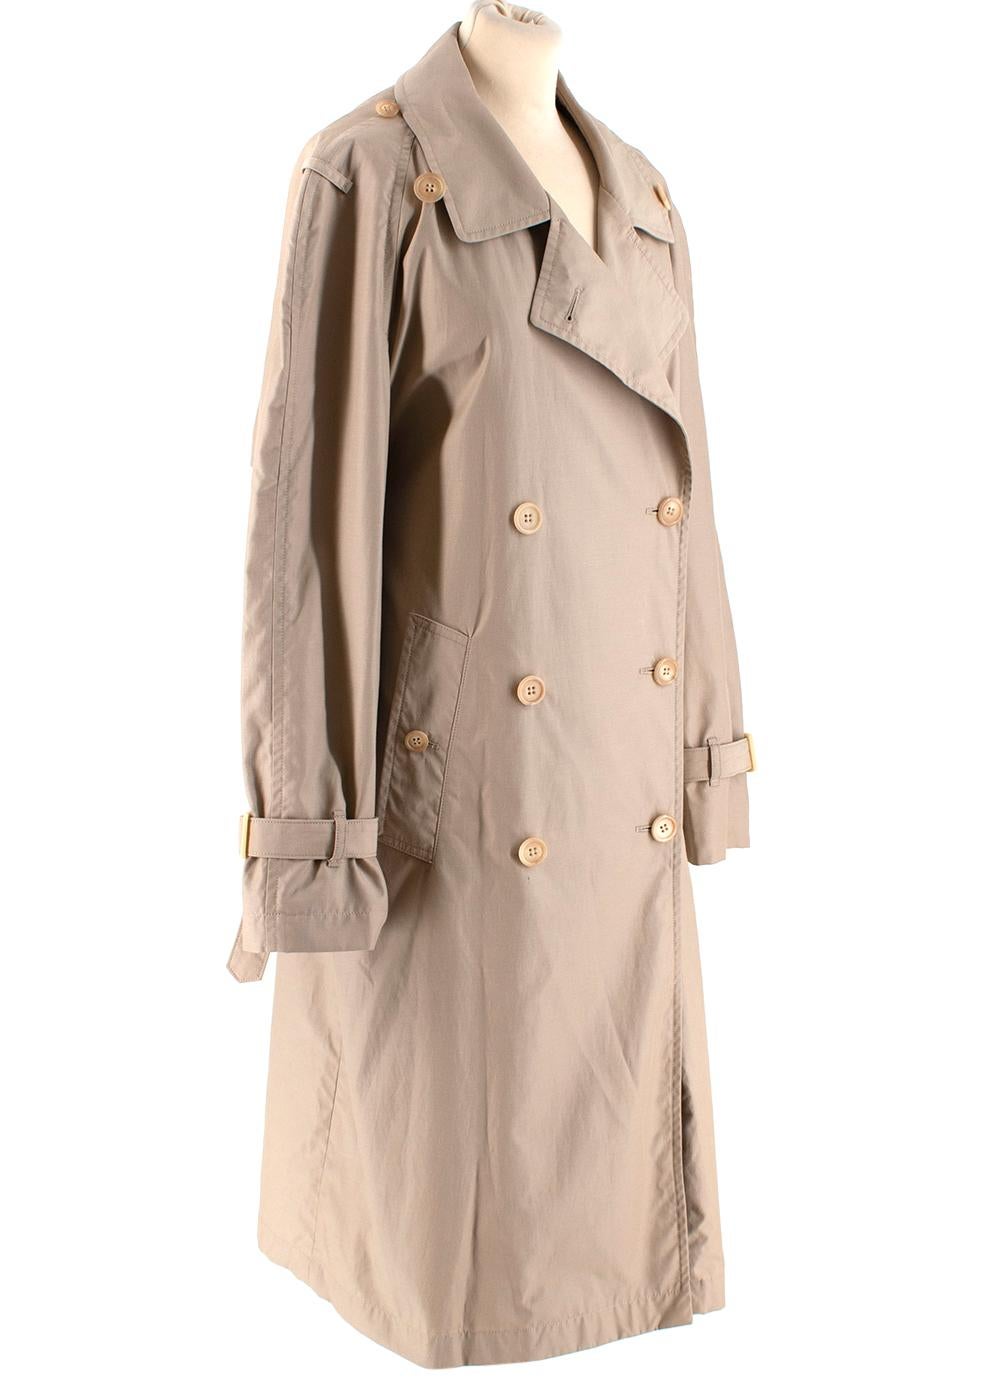 J.W. Anderson Beige Oversized Trench Coat

- Made of soft cotton canvas 
- Oversized cut 
- Strap details to the front 
- Button fasting to the front
- Double breasted cut 
- Buckled cuffs 
- Fully lined 
- Modern take on a classic style 